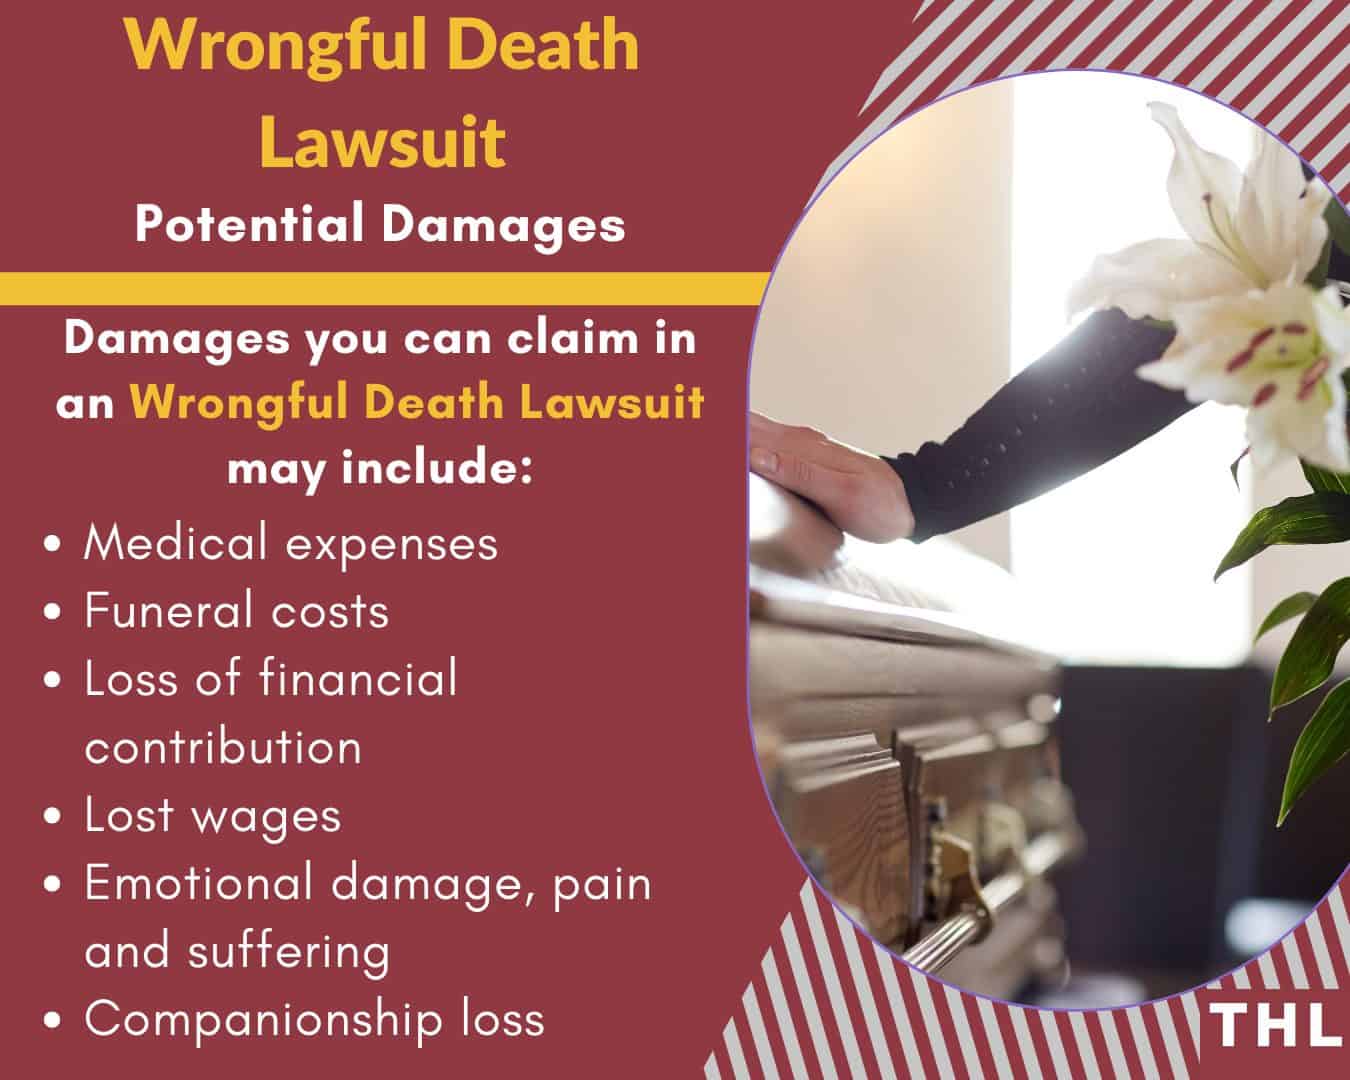 wrongful death lawsuit claims and damages